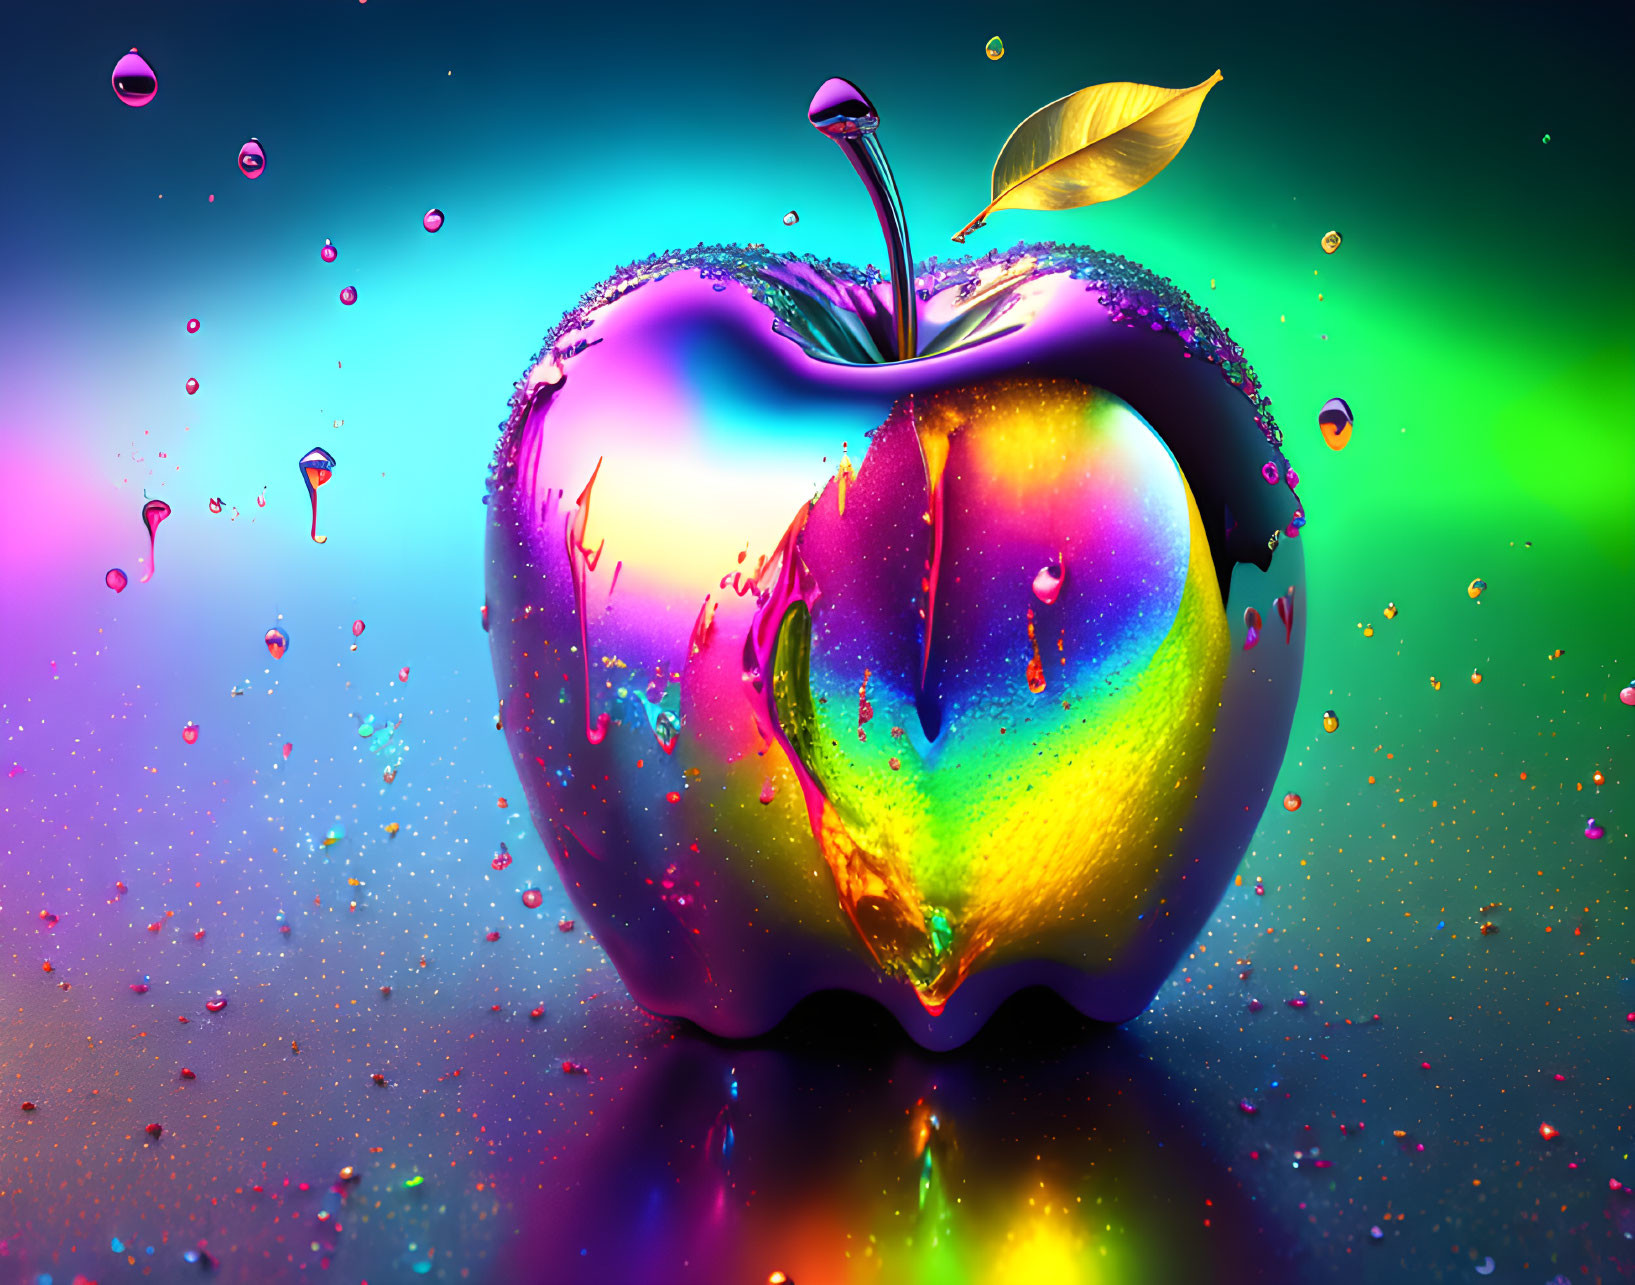 Colorful Heart-Shaped Apple with Metallic Sheen on Rainbow Background